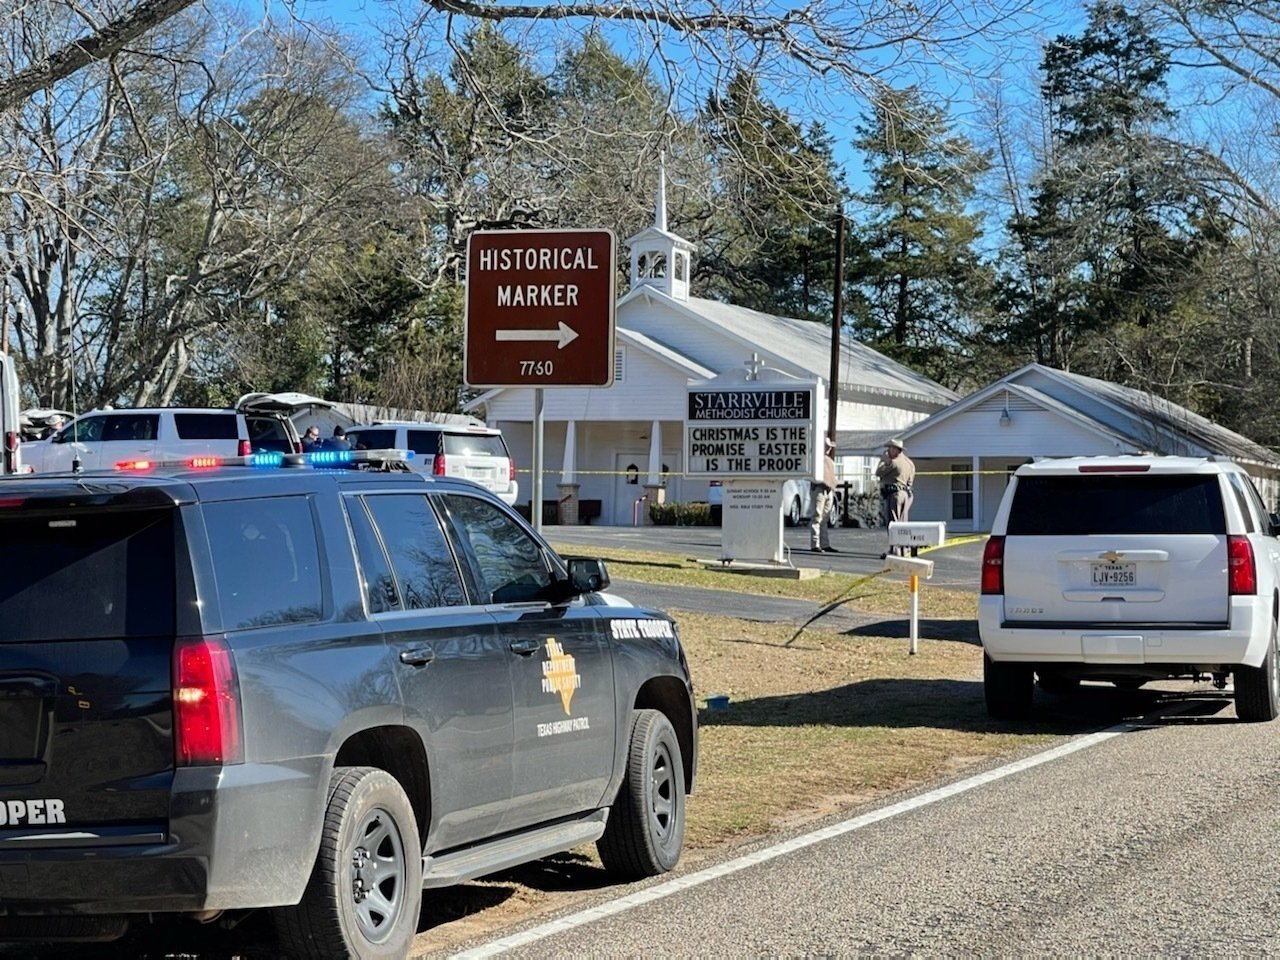 The Smith County Sheriff's Office investigates a fatal shooting incident at the Starville Methodist Church in Winona, Texas, U.S., Jan. 3, 2021. (AP Photo)